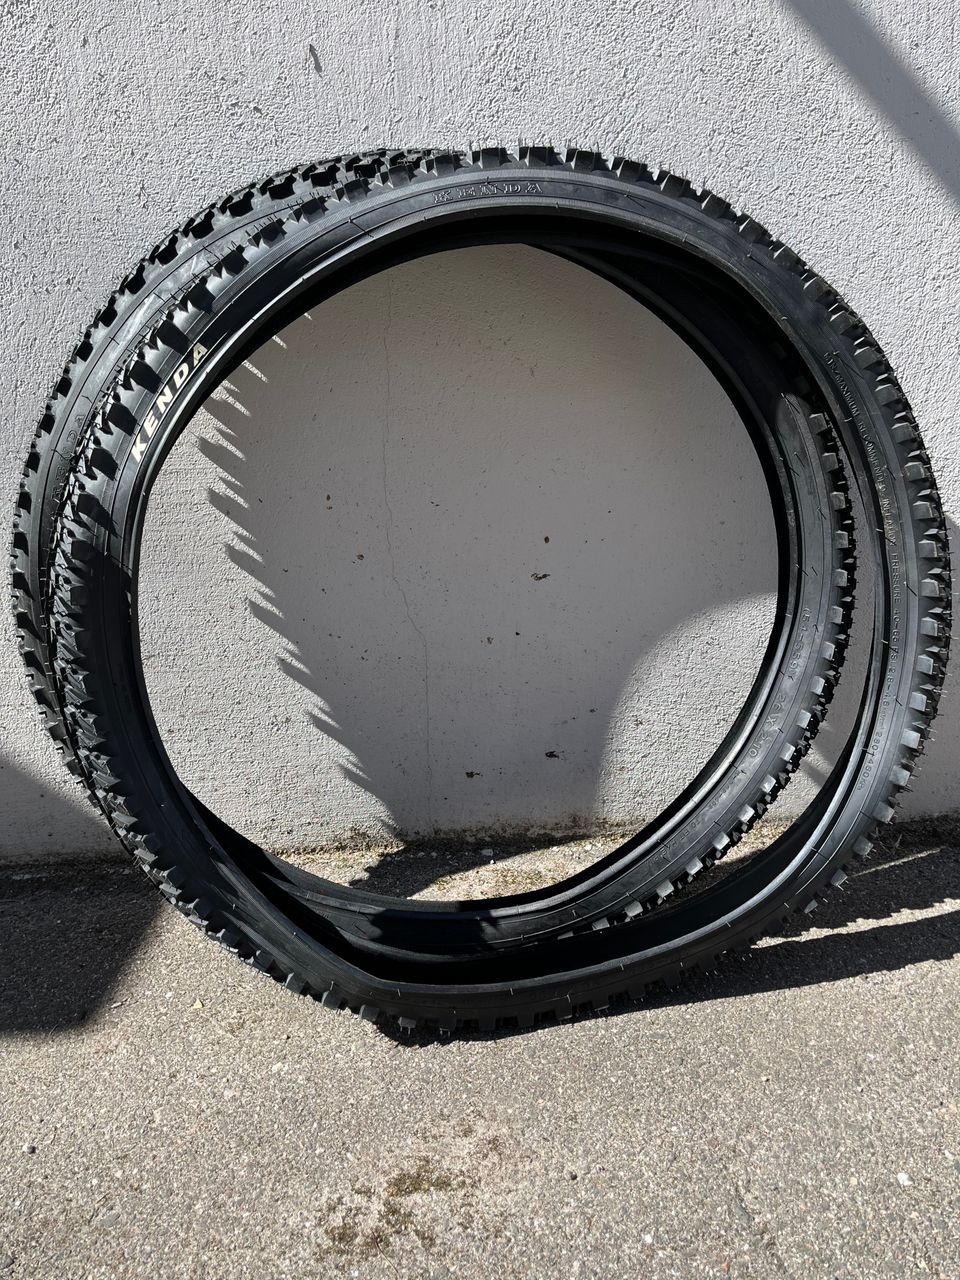 Brand new Kenda 26-inch wear-resistant, anti-skid and anti-puncture tires